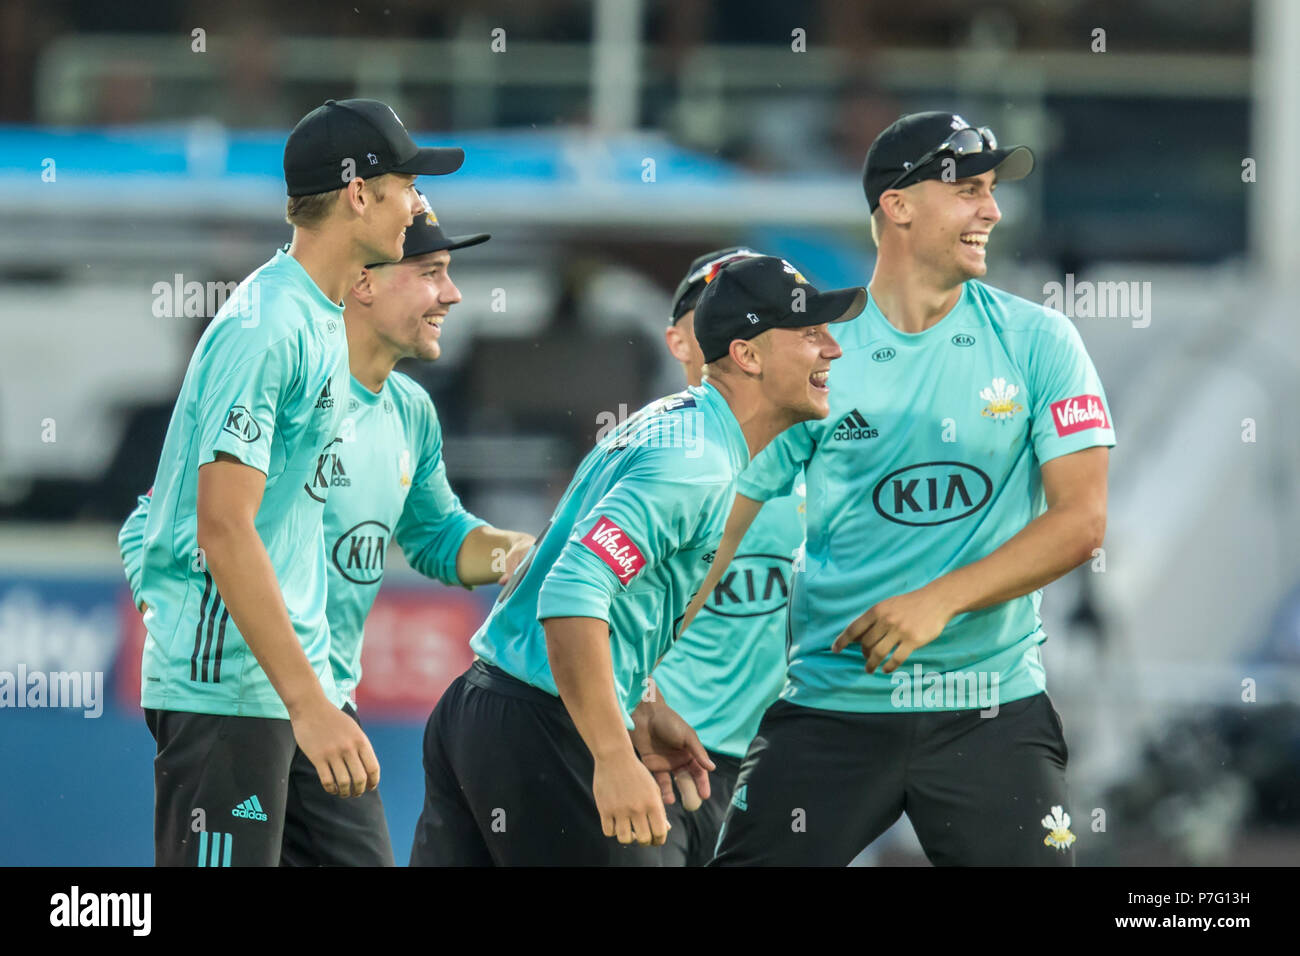 London, UK. 5 July, 2018.  The Surrey team celebrate ( L-R: Jamie Smith, Rory Burns, Scott Borthwick and Will Jacks] after Will Jacks holds on to a low catch on the boundary and Eskinazi  is out off the bowling of Morne Morkel. Middlesex v Surrey in the Vitality Blast T20 cricket match at Lords. David Rowe/Alamy Live News Stock Photo